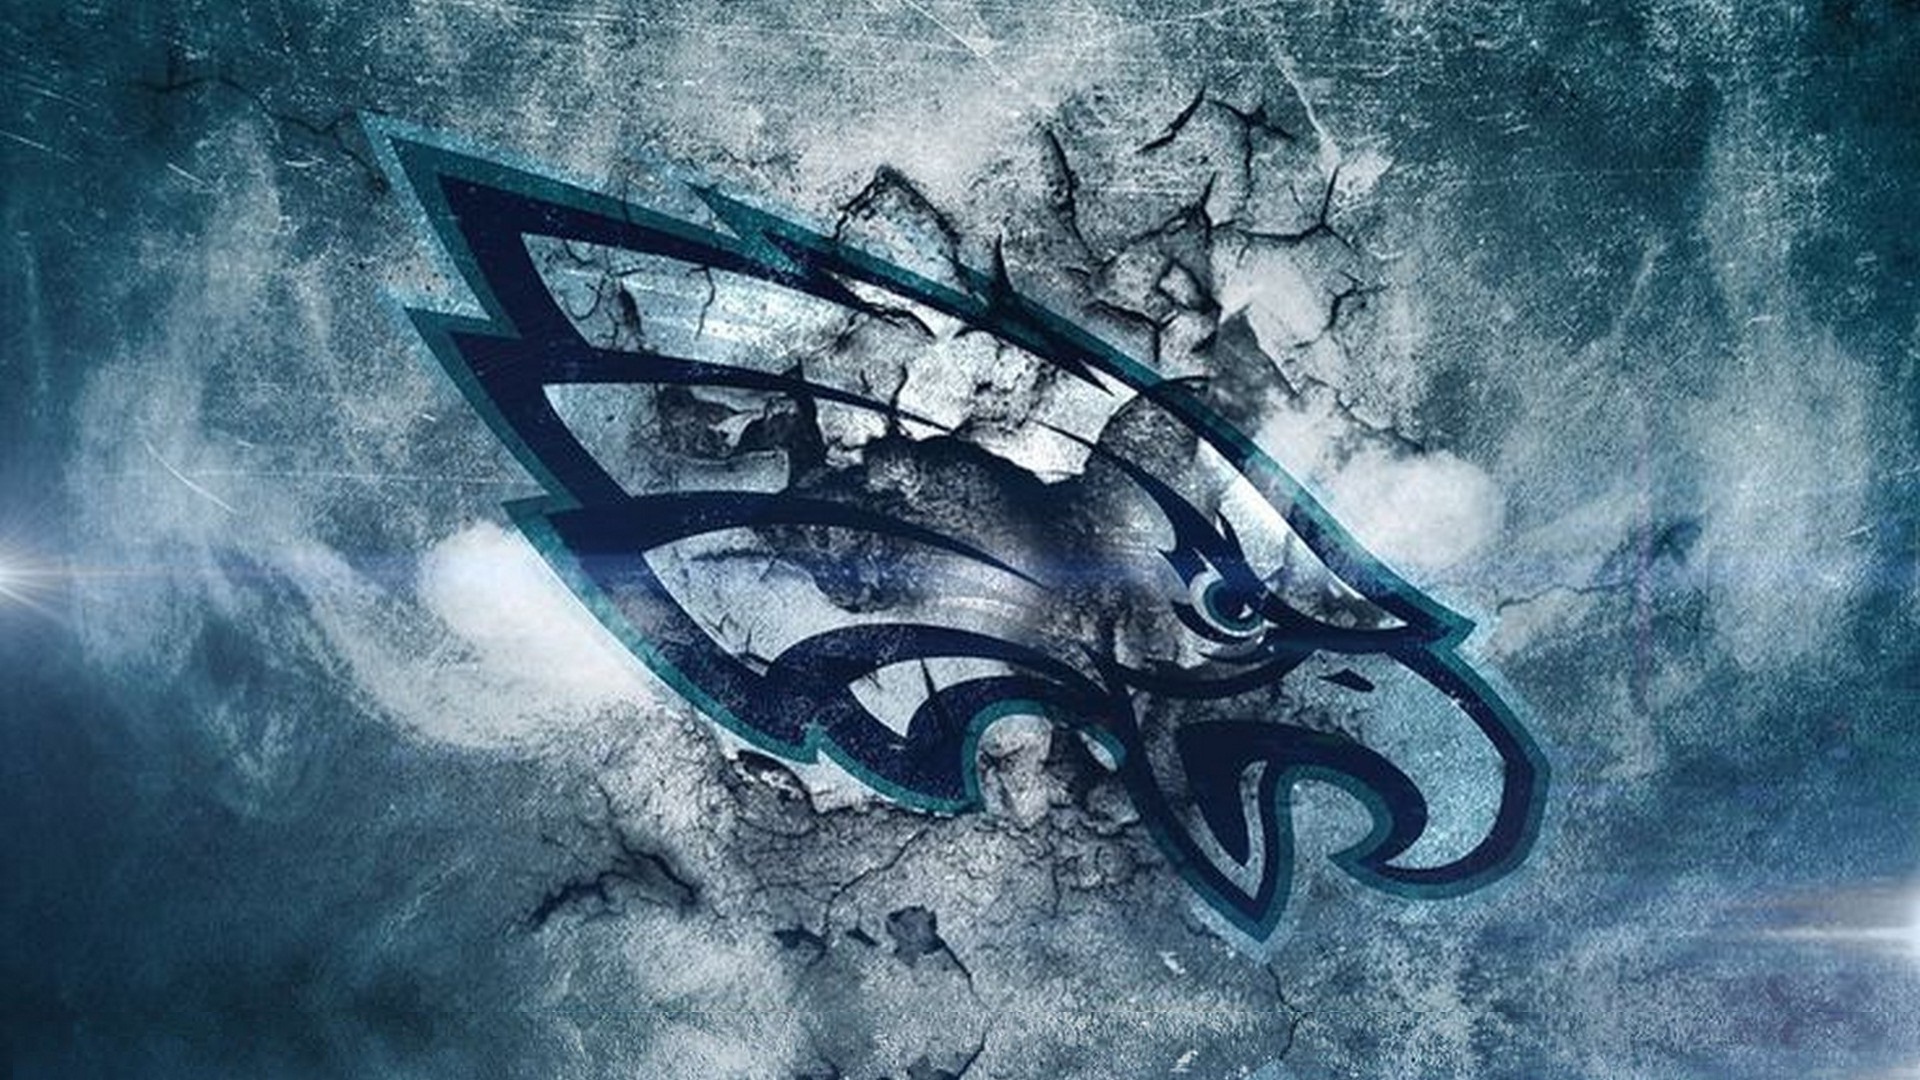 Wallpapers HD NFL Eagles With Resolution 1920X1080 pixel. You can make this wallpaper for your Mac or Windows Desktop Background, iPhone, Android or Tablet and another Smartphone device for free